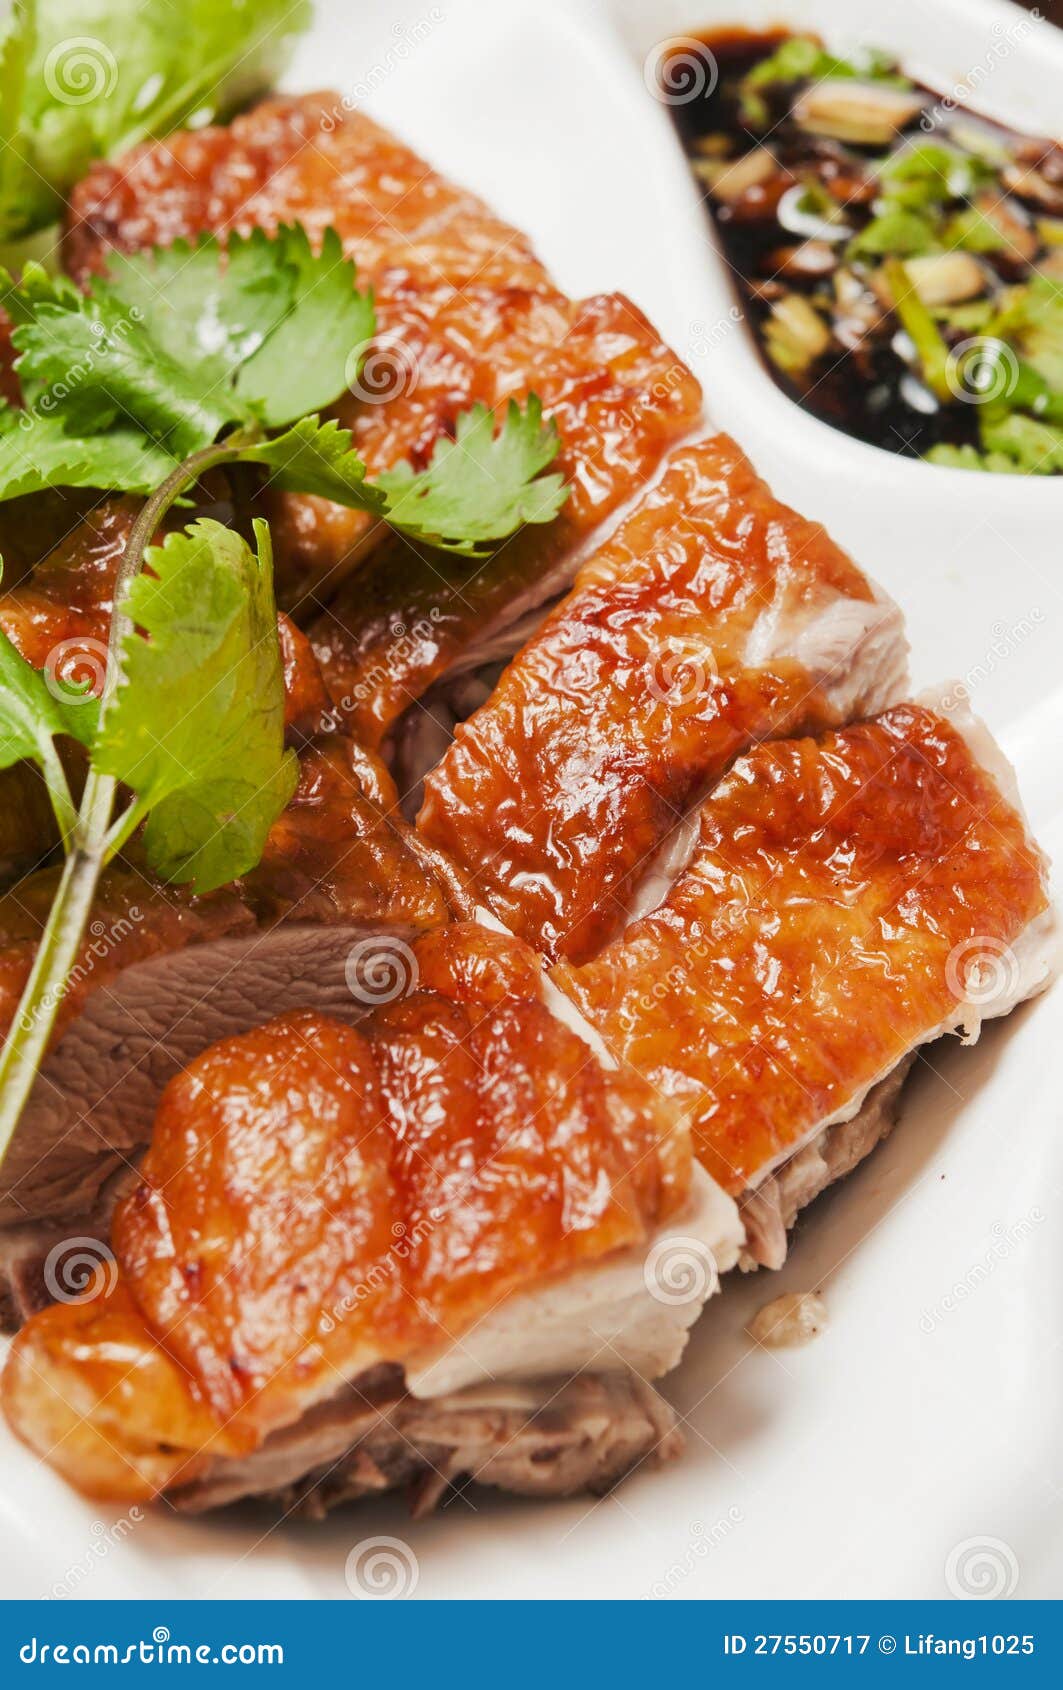 Chinese food-Roast duck stock image. Image of chicken - 27550717